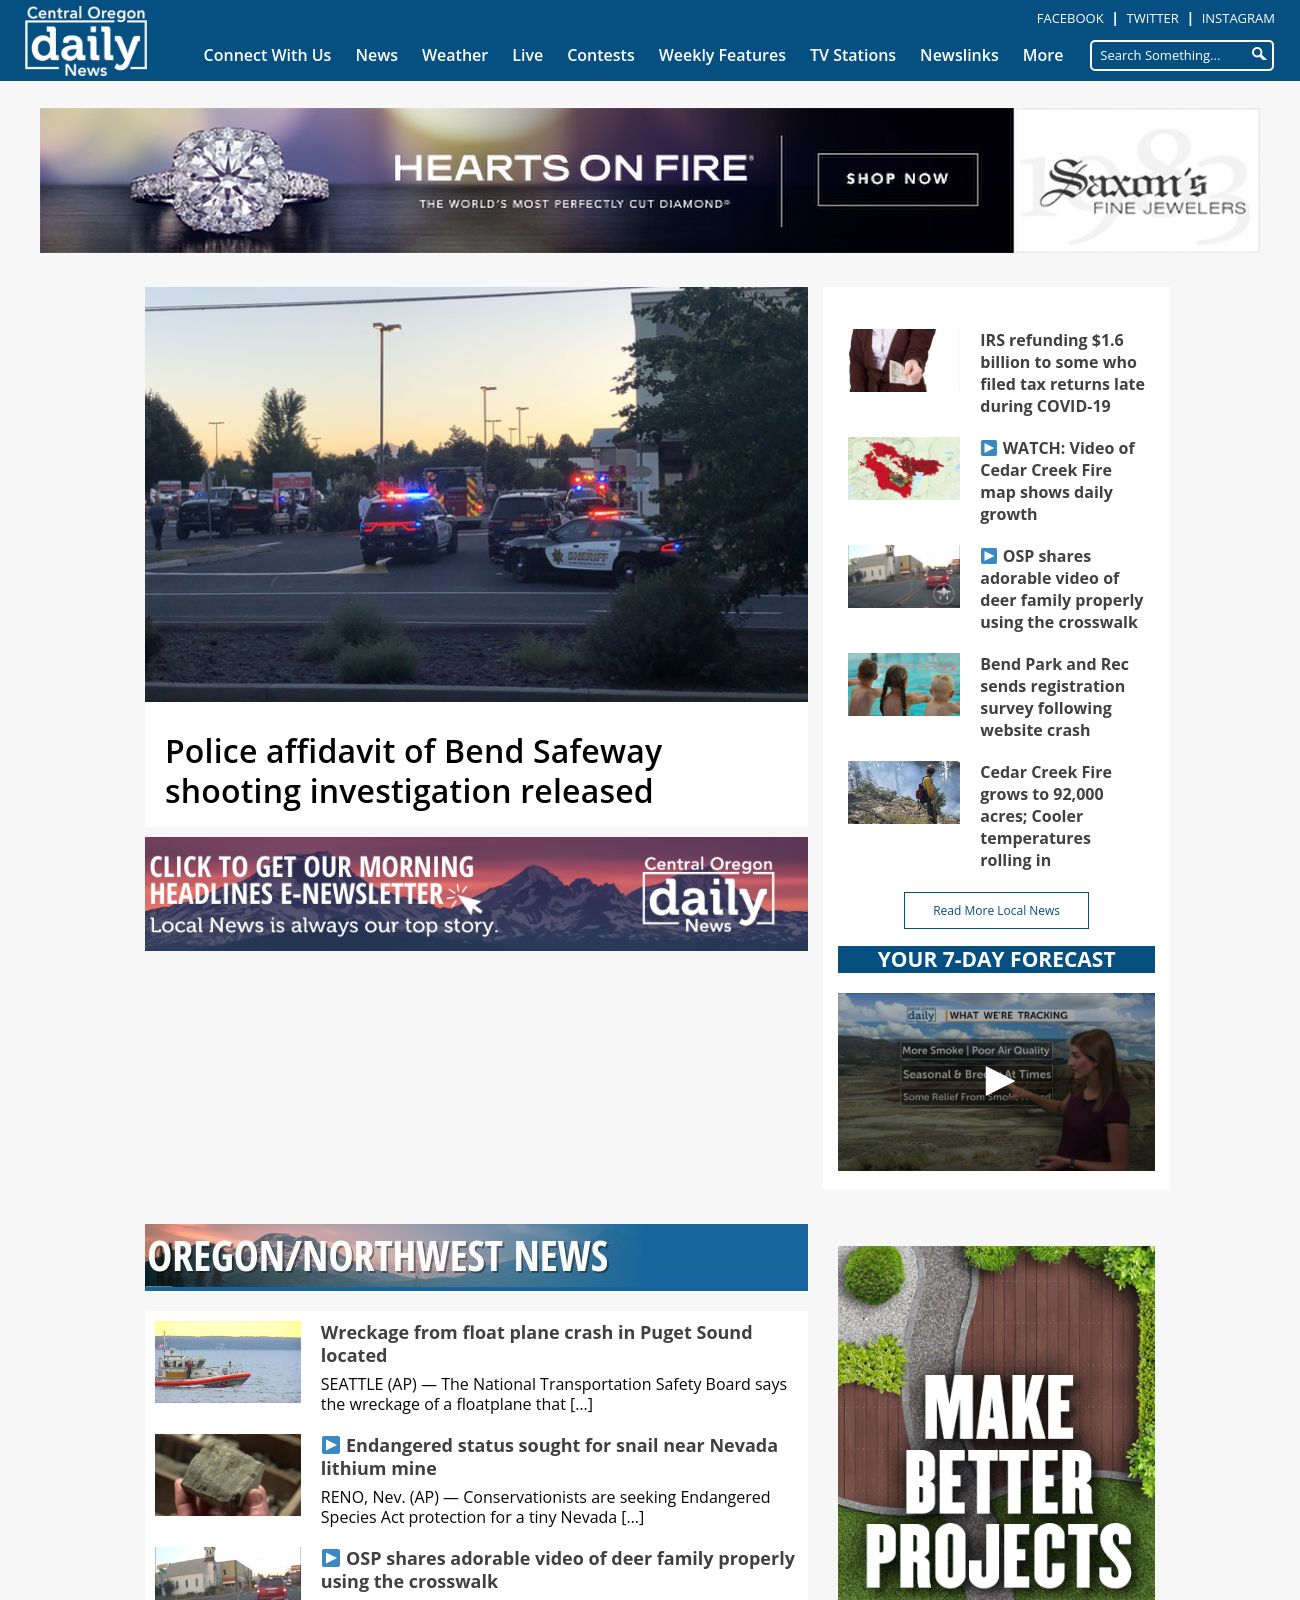 Central Oregon Daily at 2022-09-13 16:01:21-07:00 local time